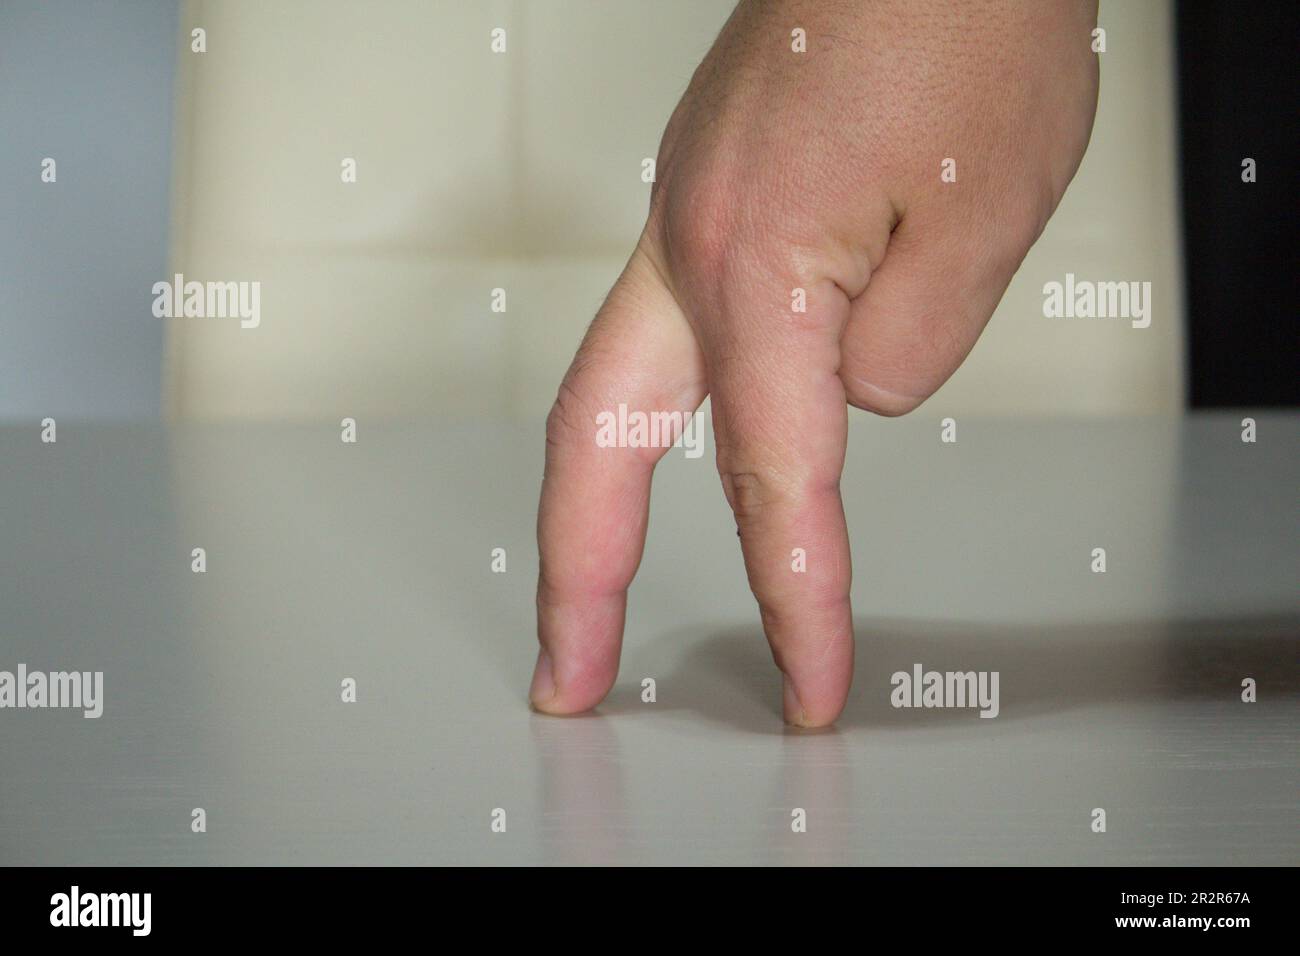 Image of the fingers of a hand imitating a person's walk. Stock Photo